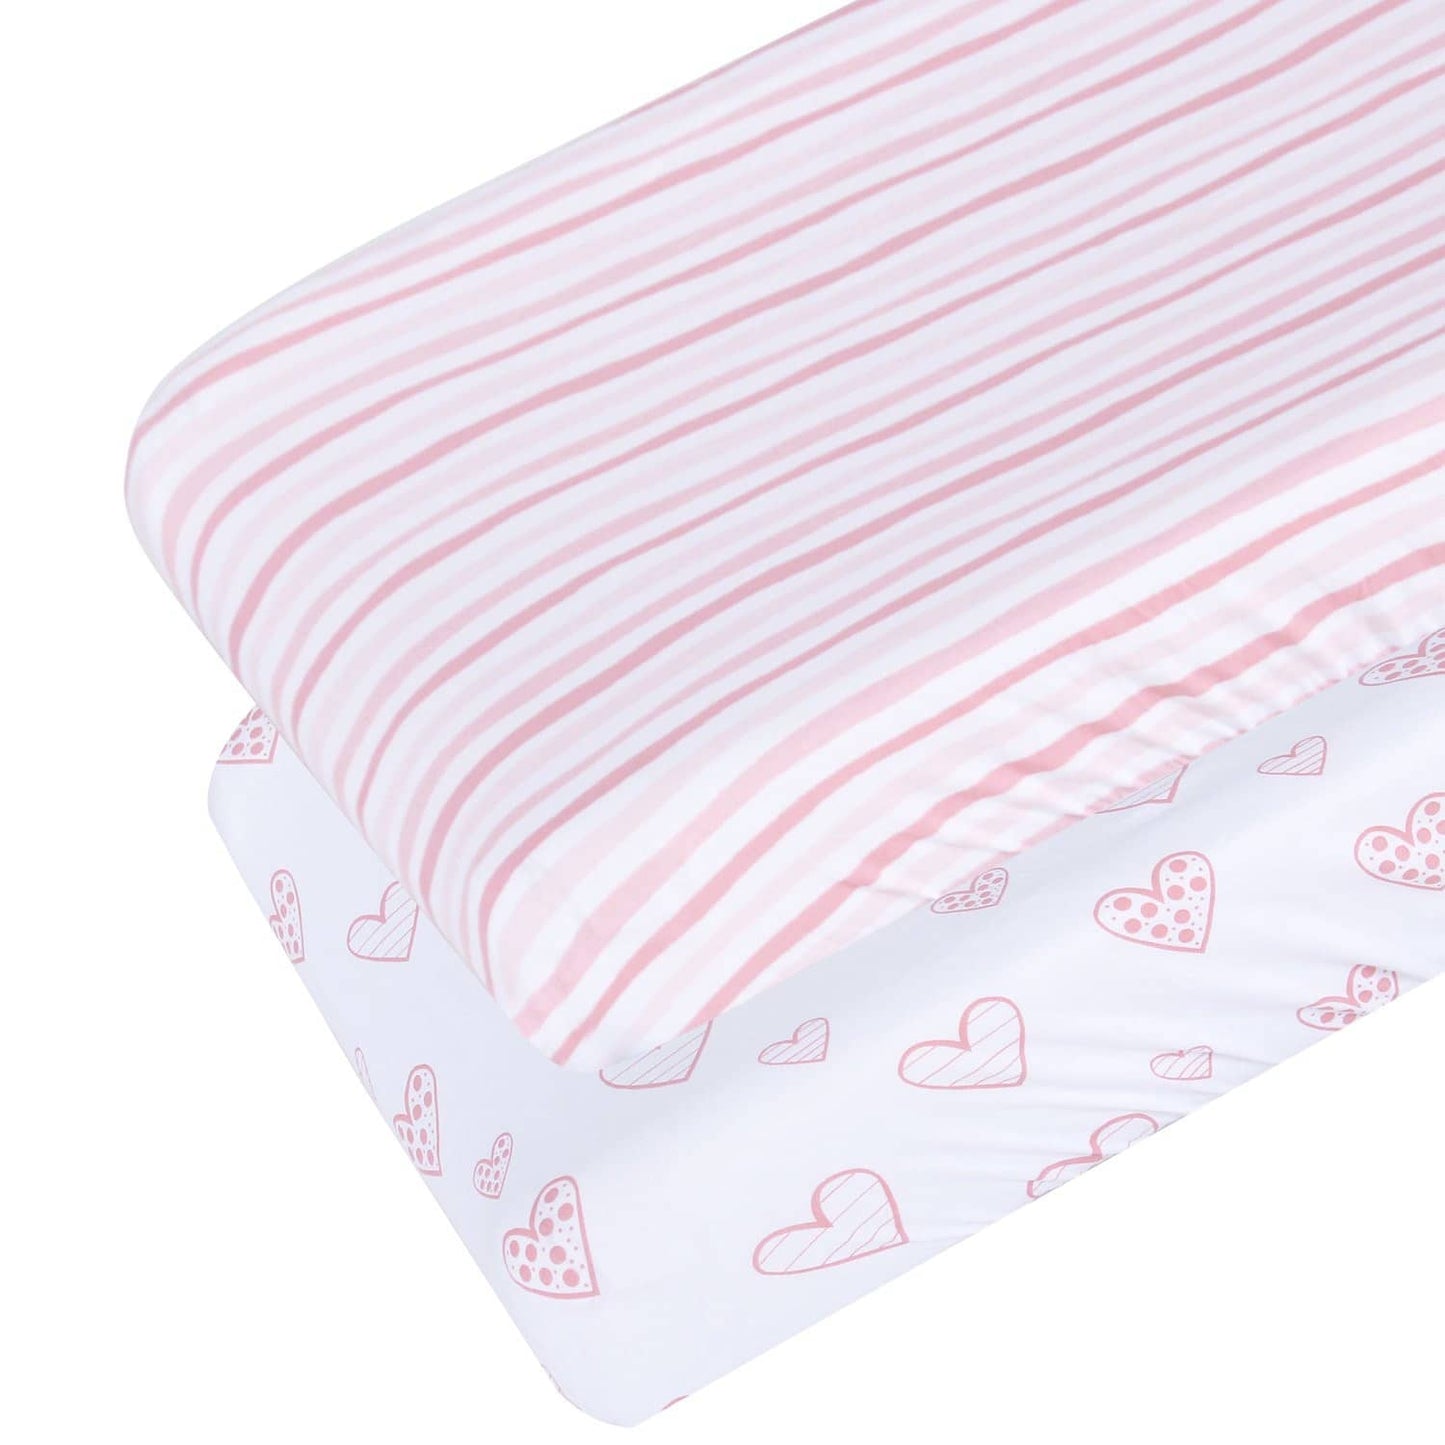 Changing Pad Cover - 2 Pack Pink, Ultra Soft 100% Jersey Knit Cotton, Heart Print - Biloban Online Store